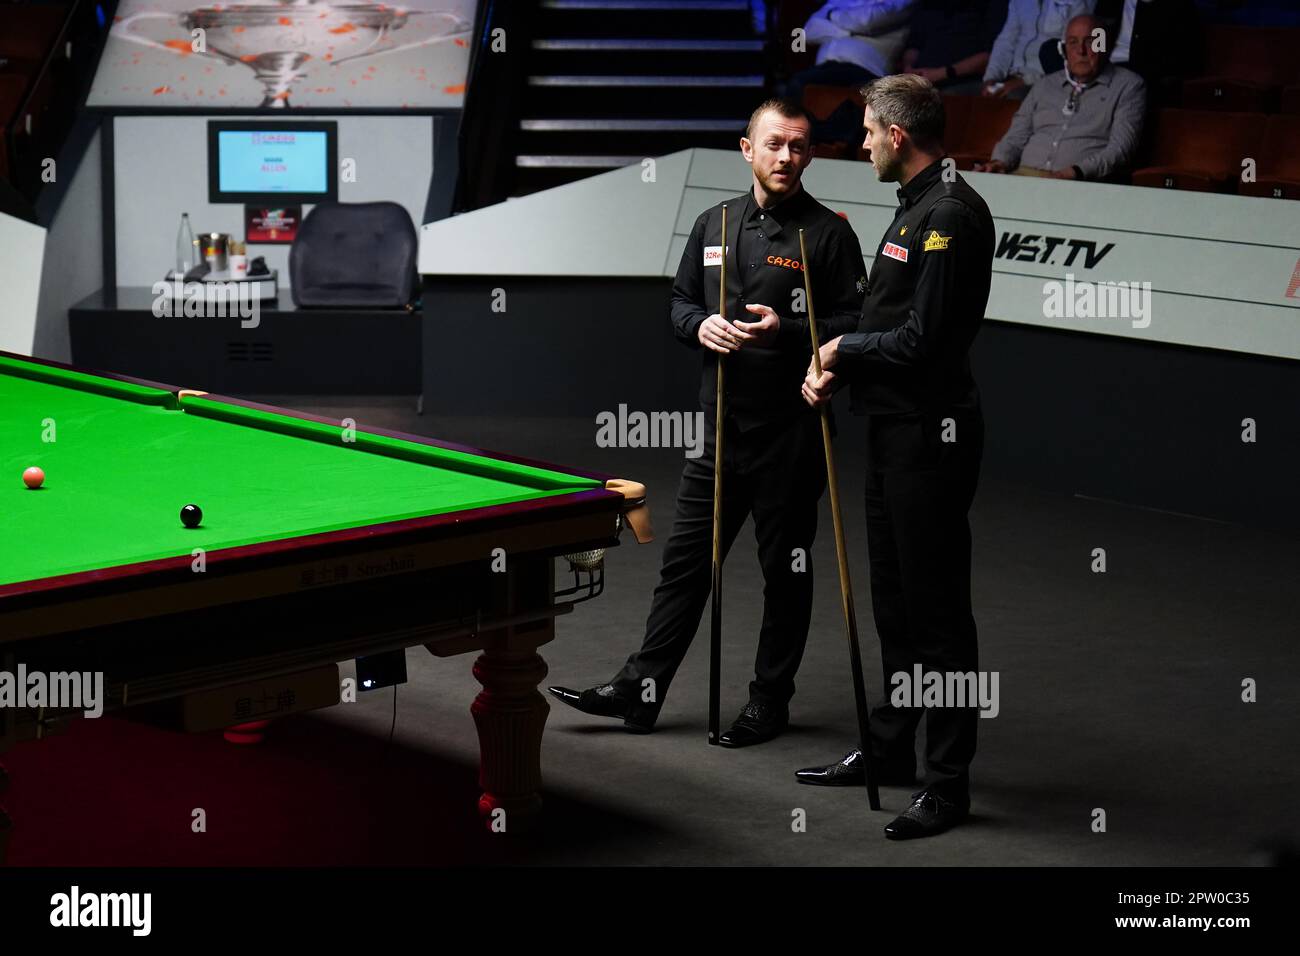 Mark Allen and Mark Selby (right) discuss the score during their match on day fourteen of the Cazoo World Snooker Championship at the Crucible Theatre, Sheffield